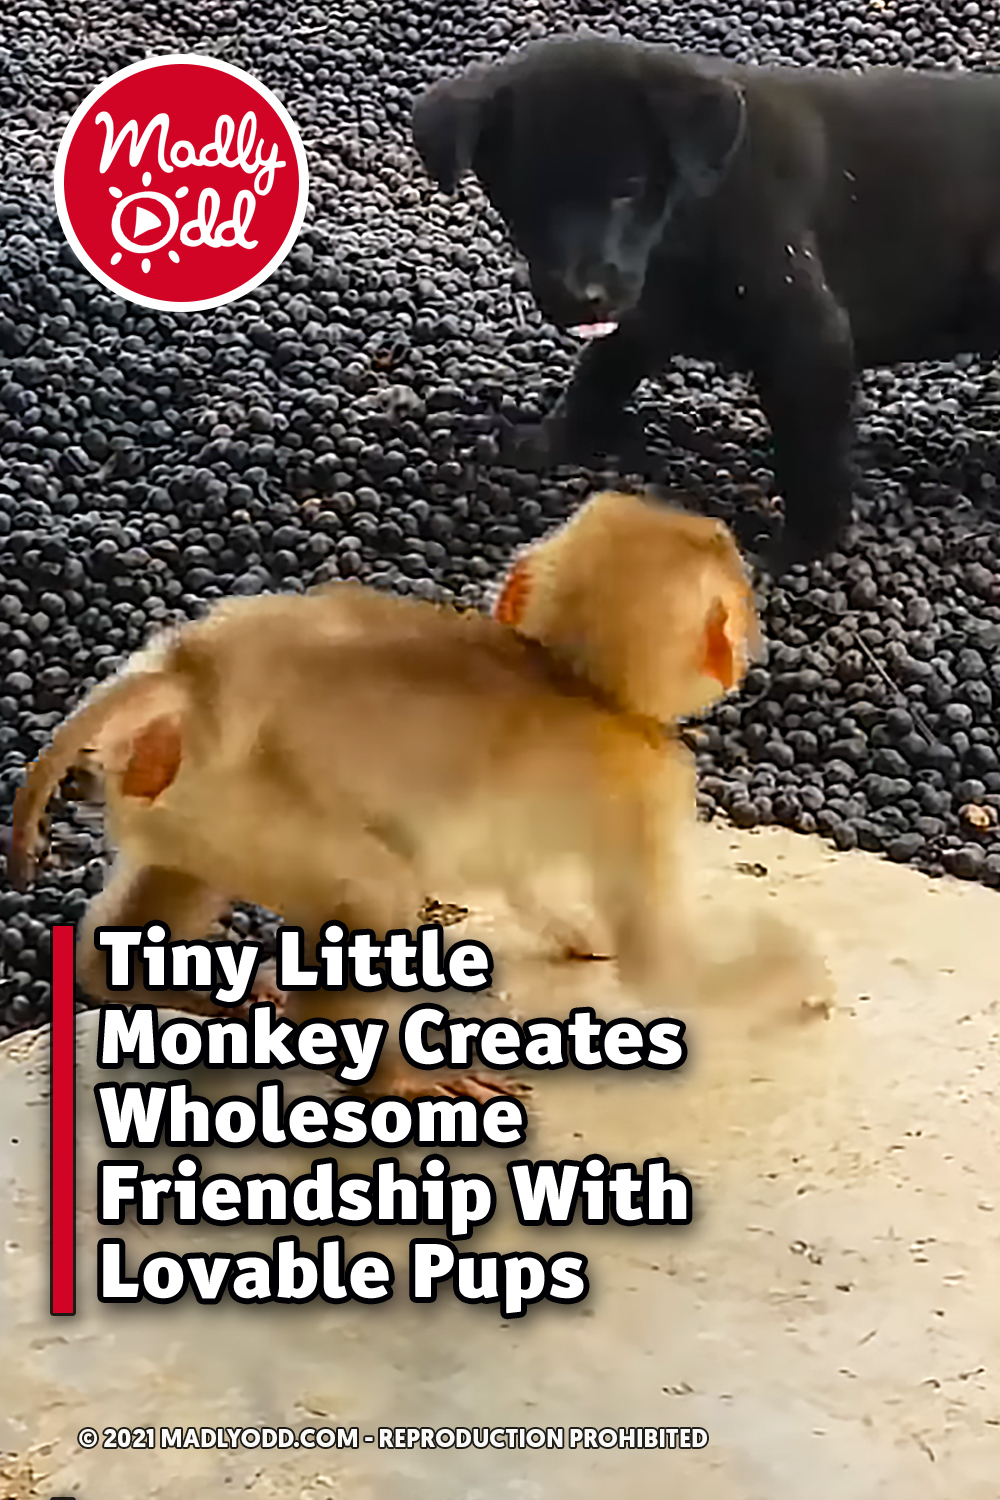 Tiny Little Monkey Creates Wholesome Friendship With Lovable Pups